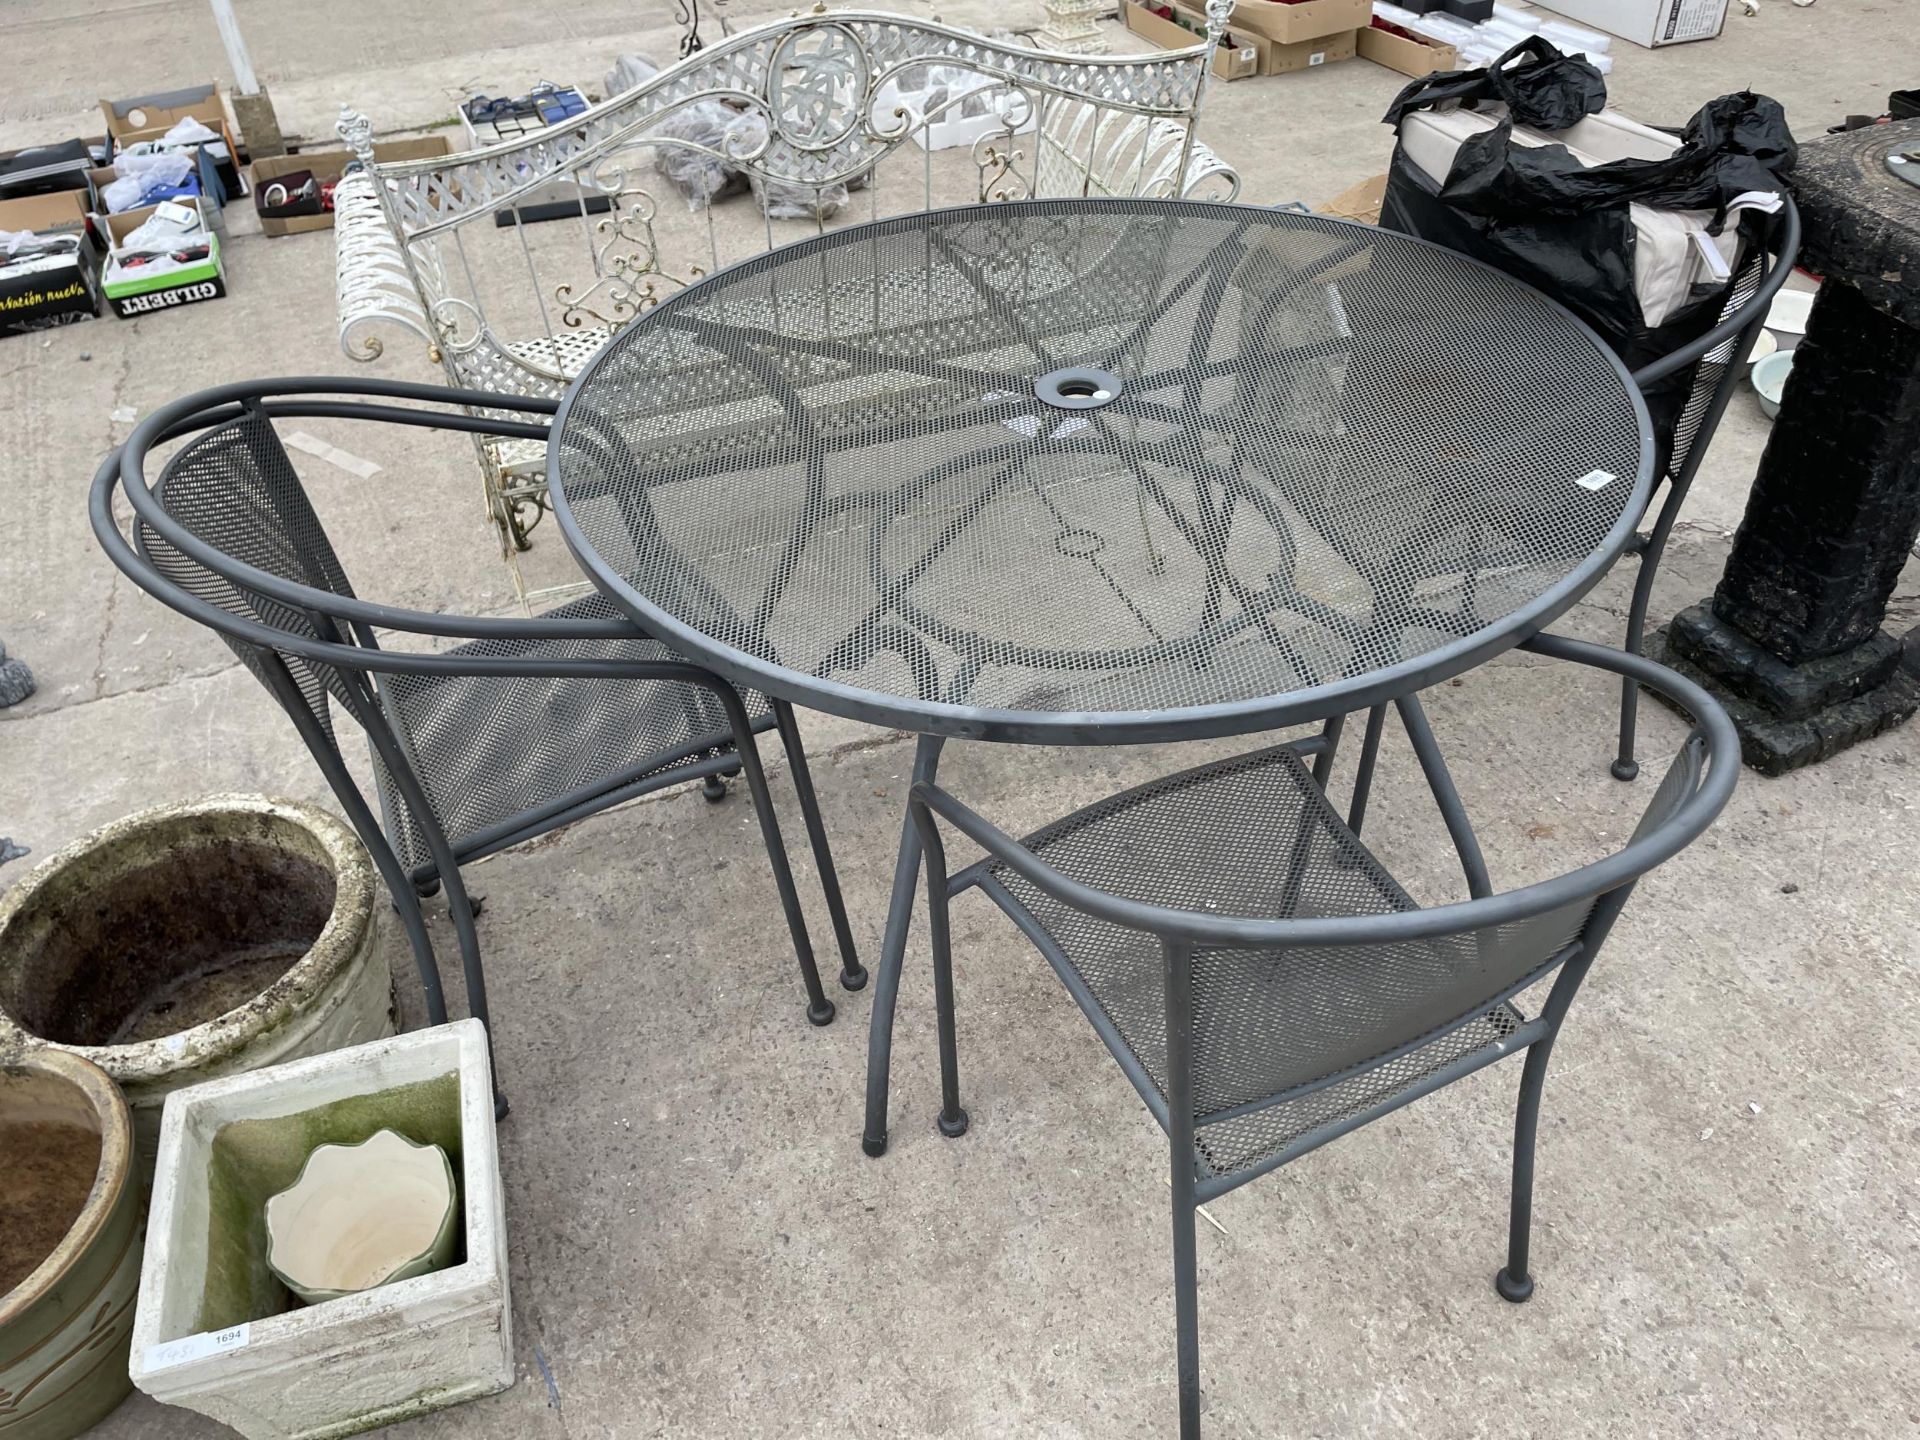 A METAL PATIO FURNITURE SET COMPRISING OF A ROUND TABLE AND FOUR CHAIRS WITH CUSHIONS